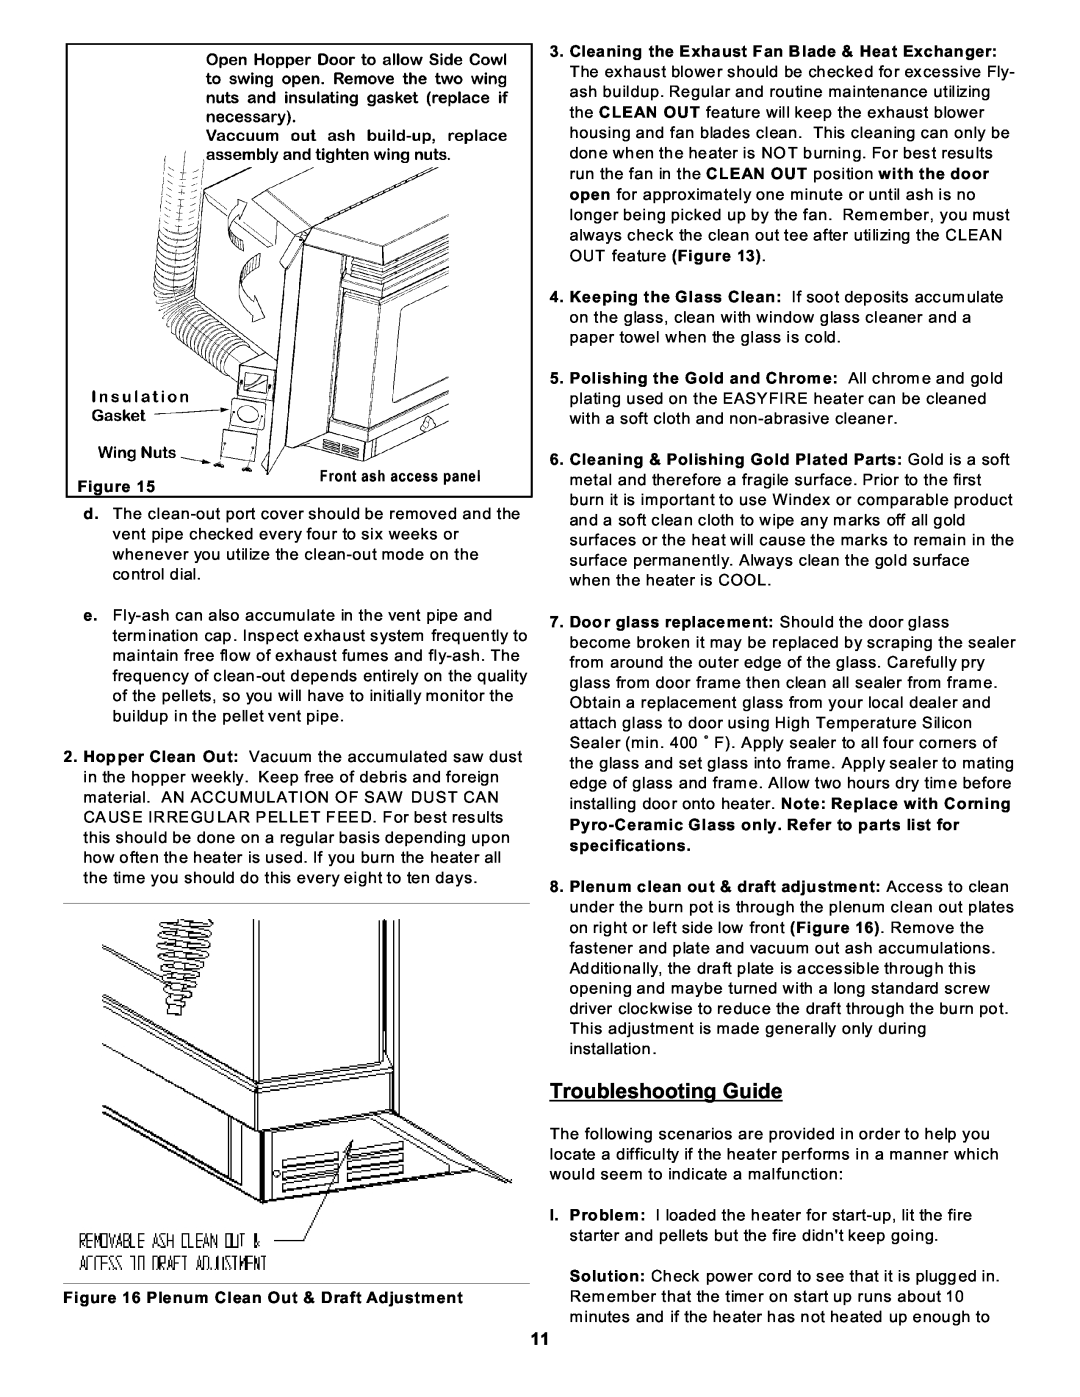 Sierra Products EF-4001B operating instructions Troubleshooting Guide, Front ash access panel Figure 